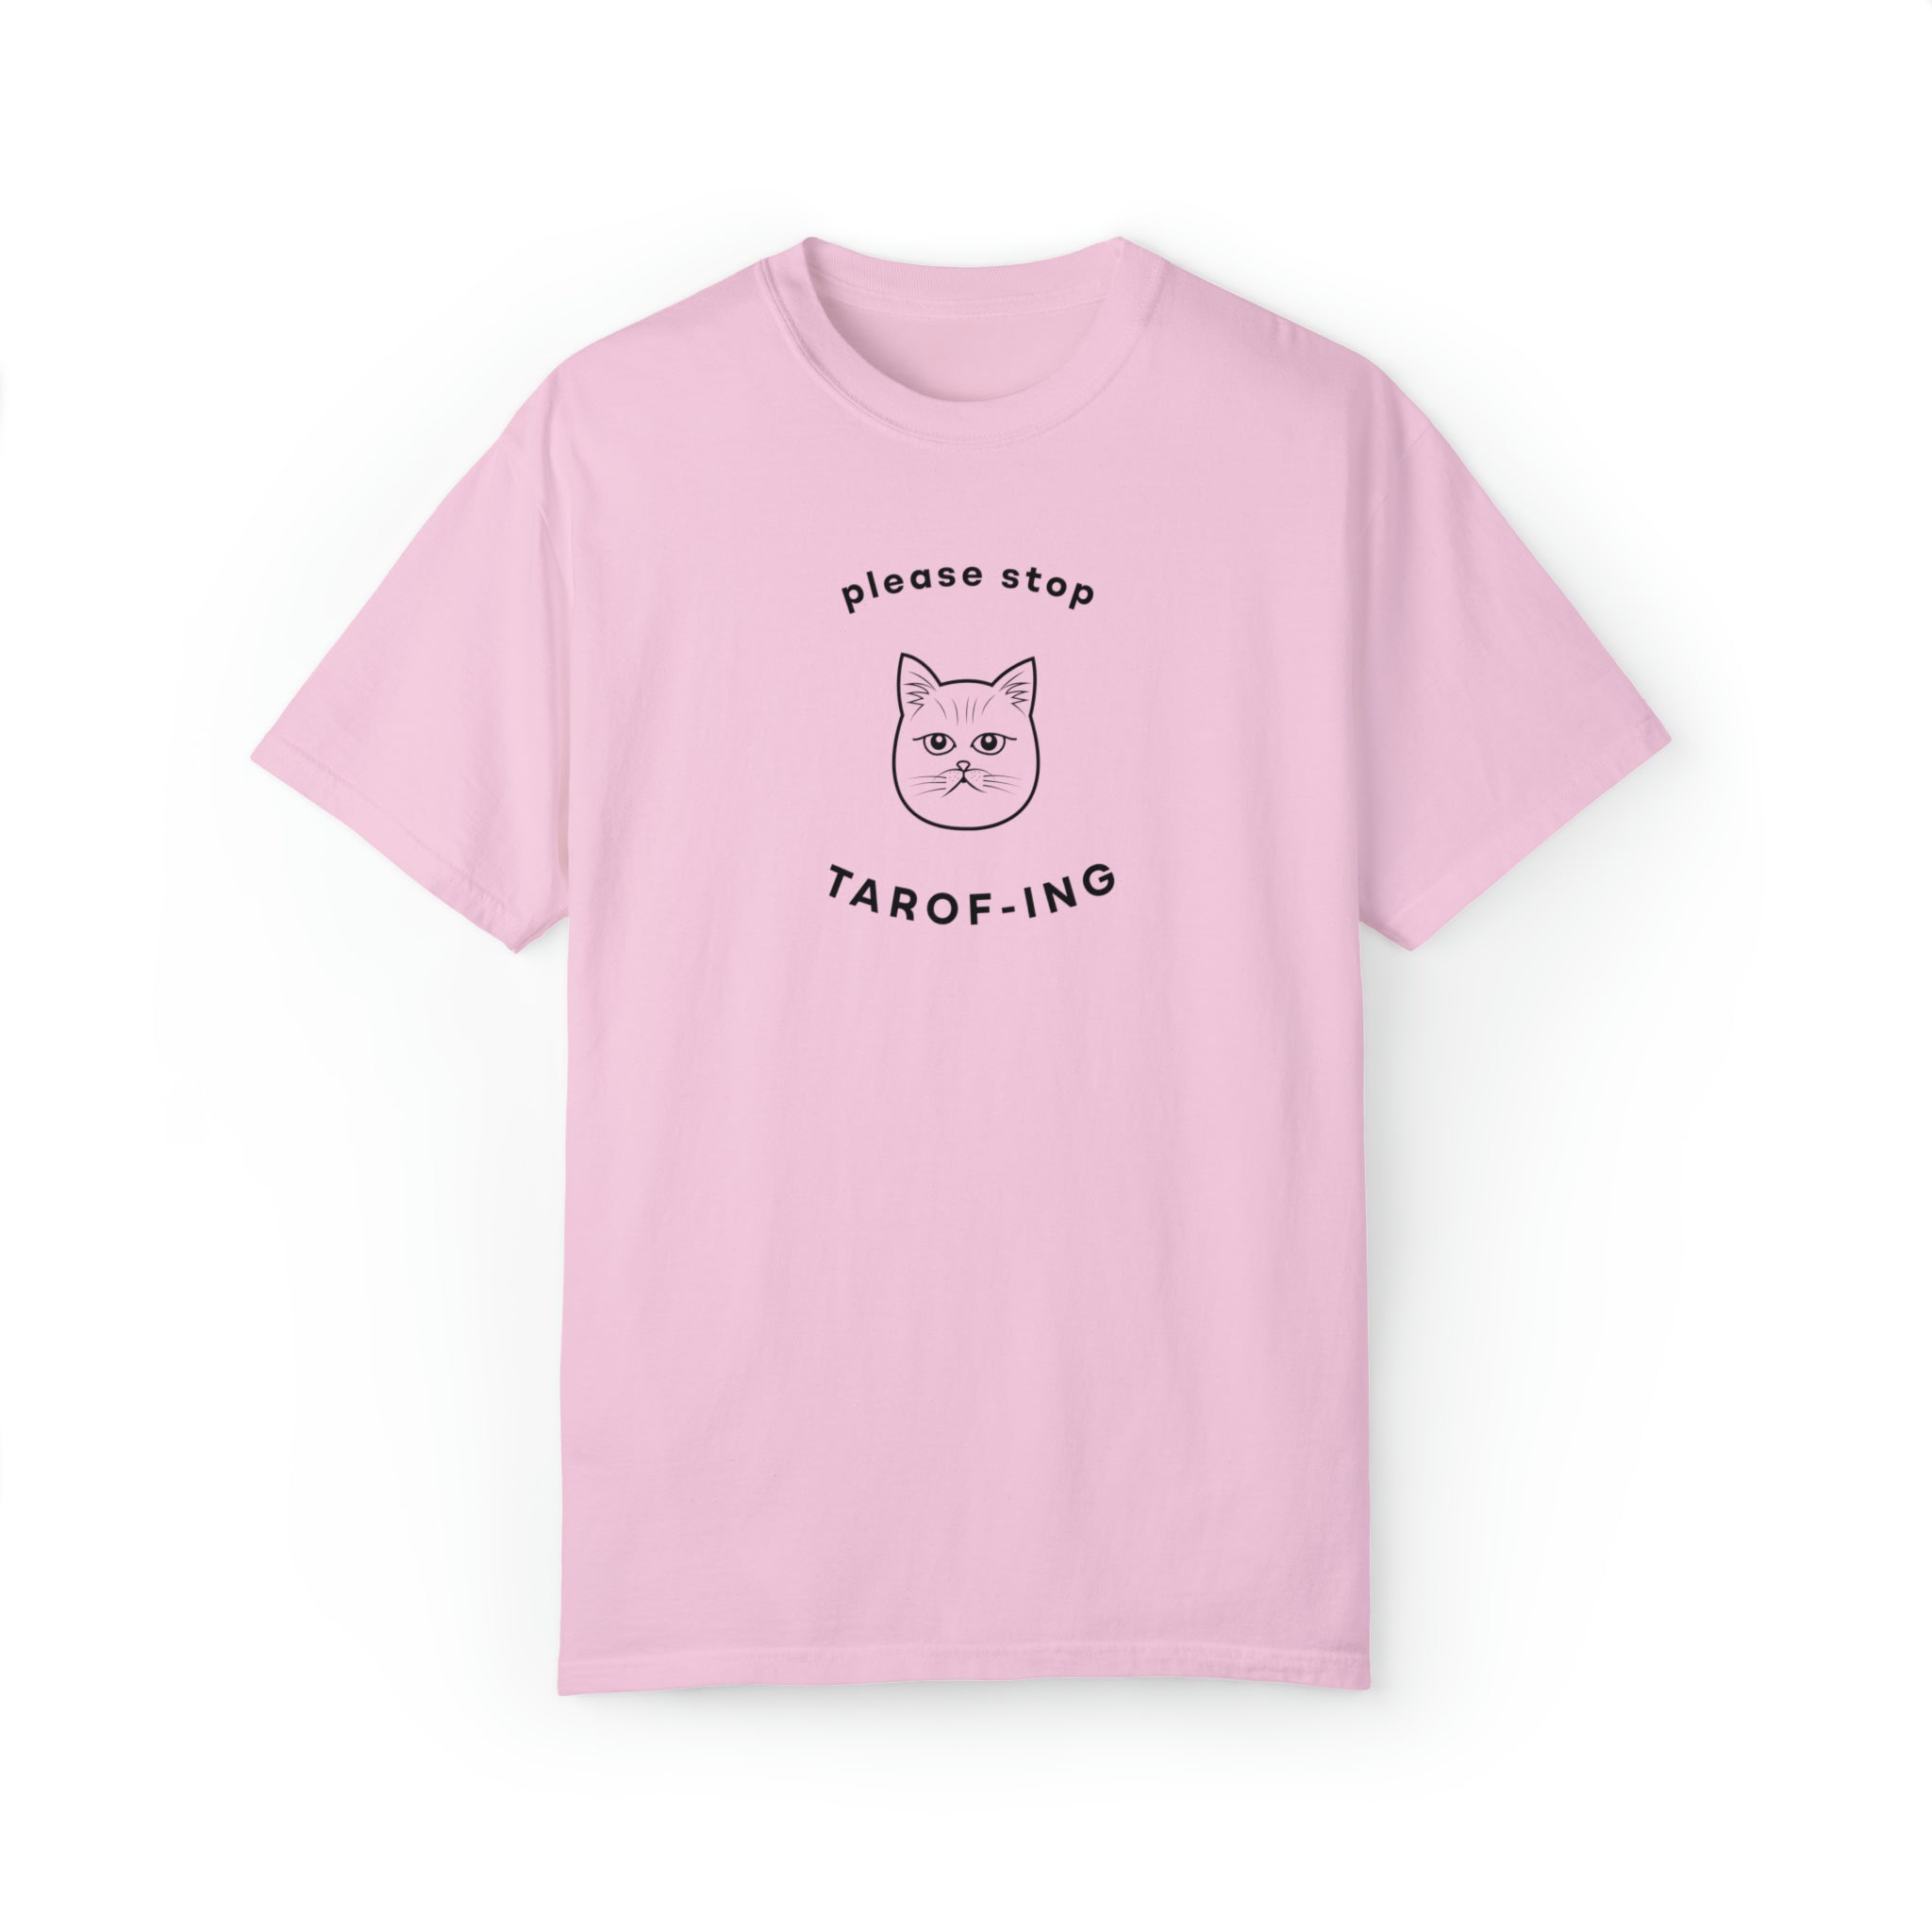 Please Stop Tarof-ing - FUNNY CULTURE SHIRTS